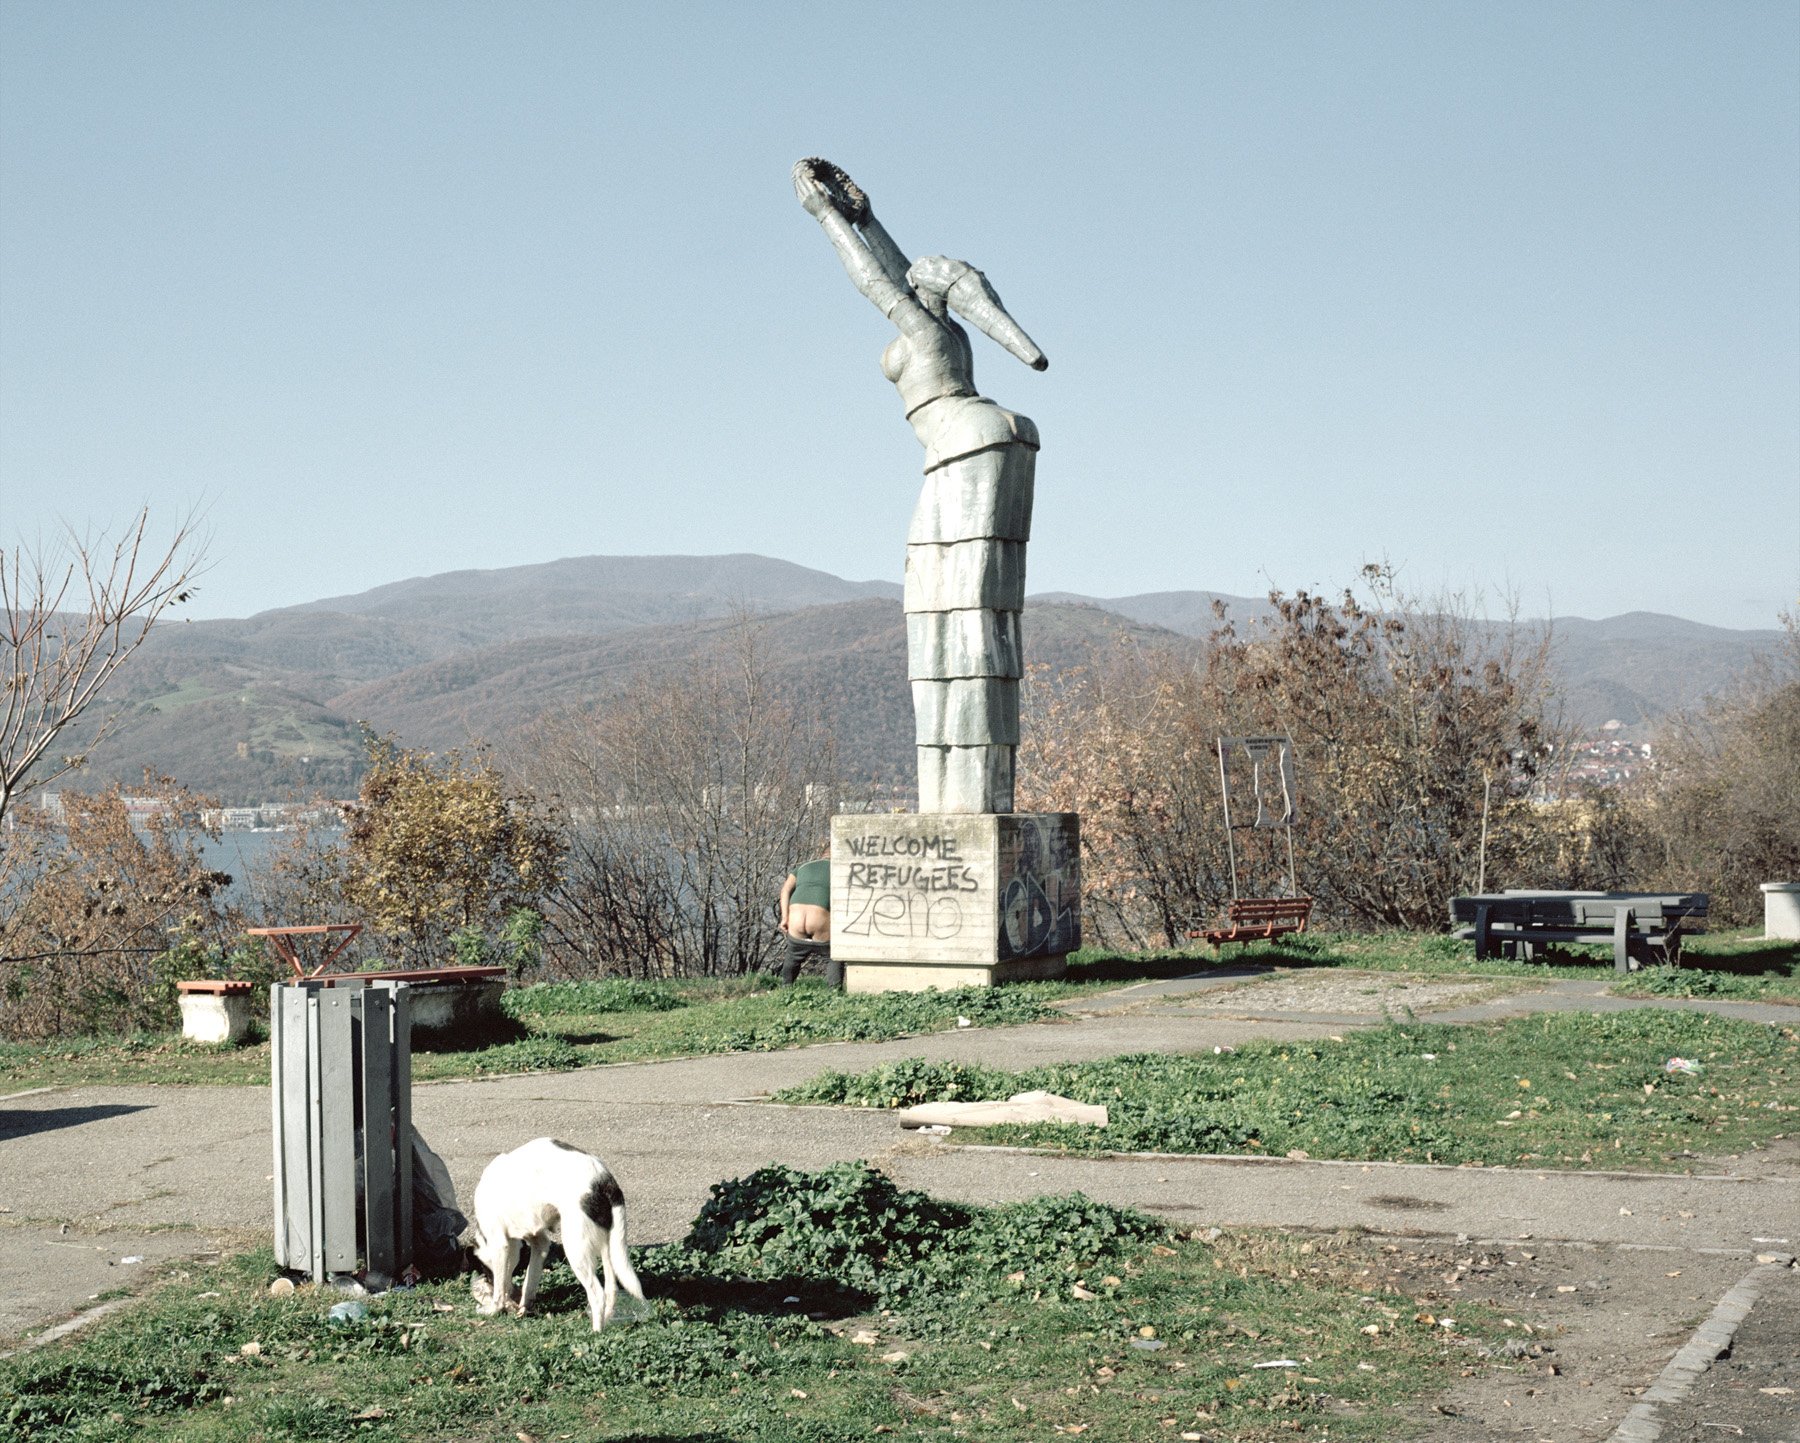  Romania, Orsova. 2016. A communist style monument with a wrote welcoming refugees. 